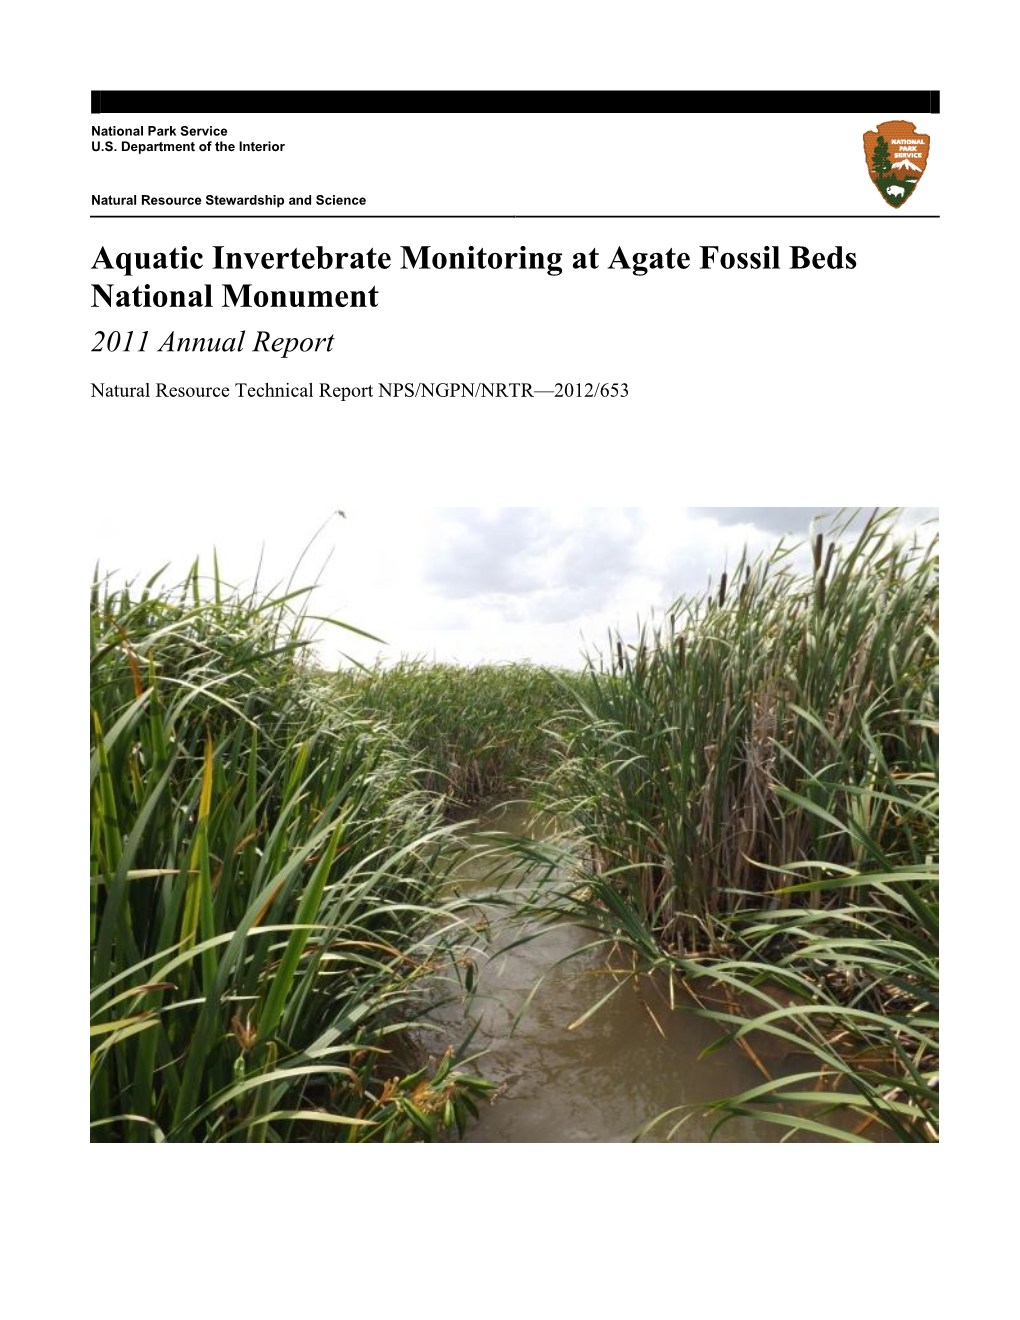 Aquatic Invertebrate Monitoring at Agate Fossil Beds National Monument 2011 Annual Report